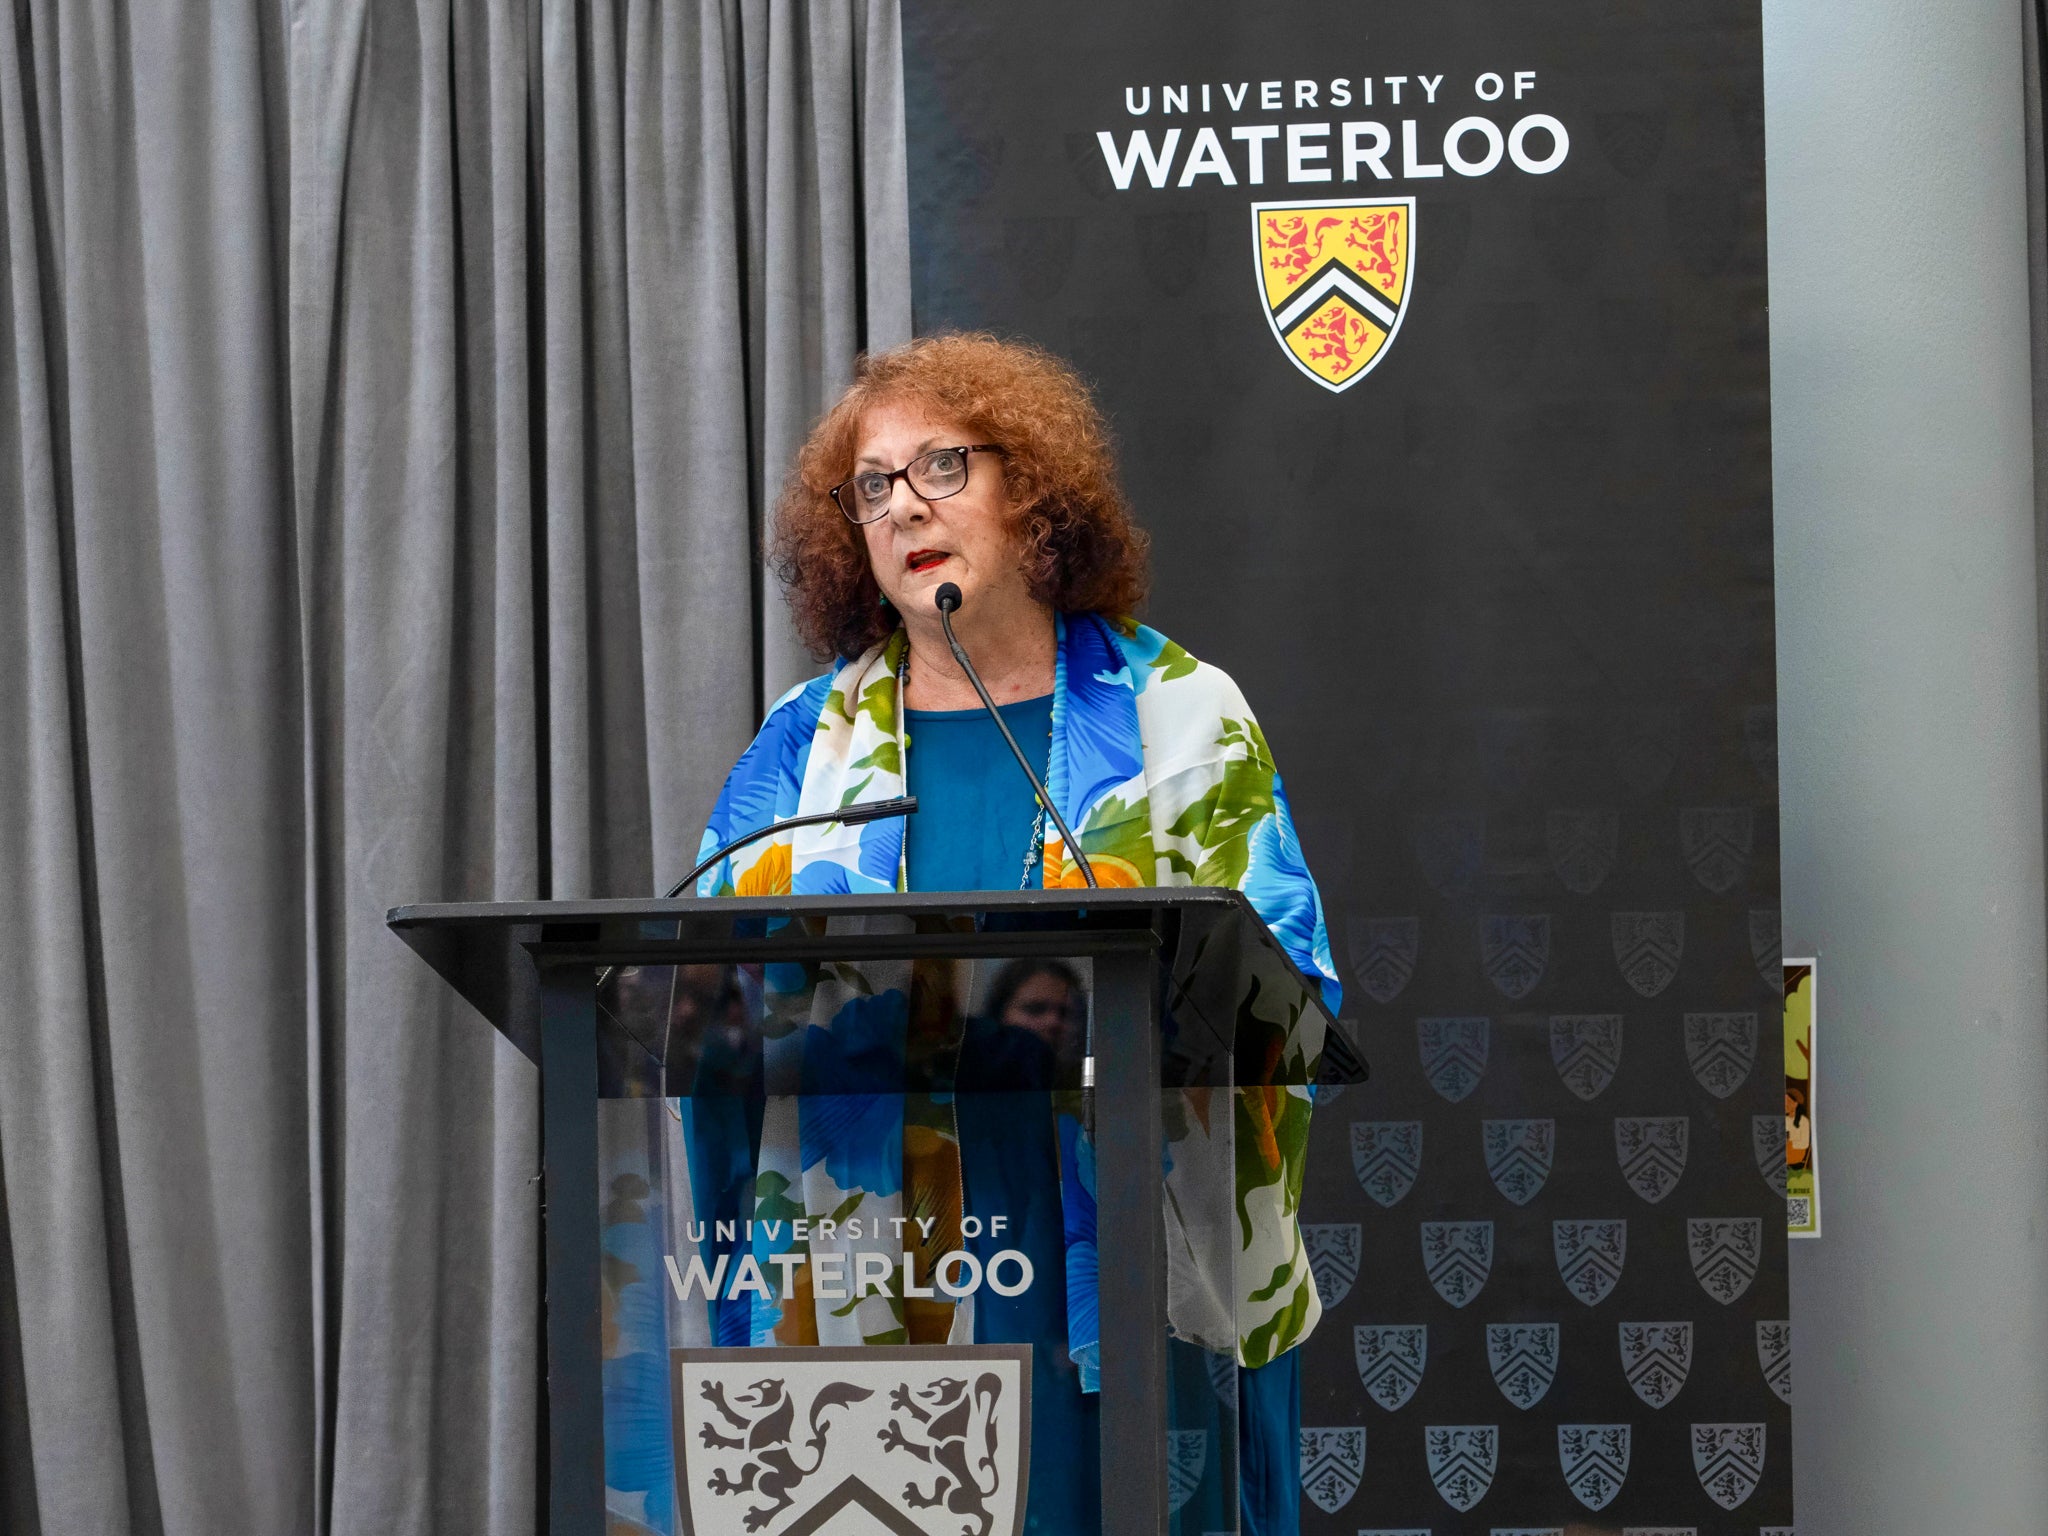 Dr. Sheila Ager speaking at a podium inside Hagey Hall Hub with a University of Waterloo banner behind her